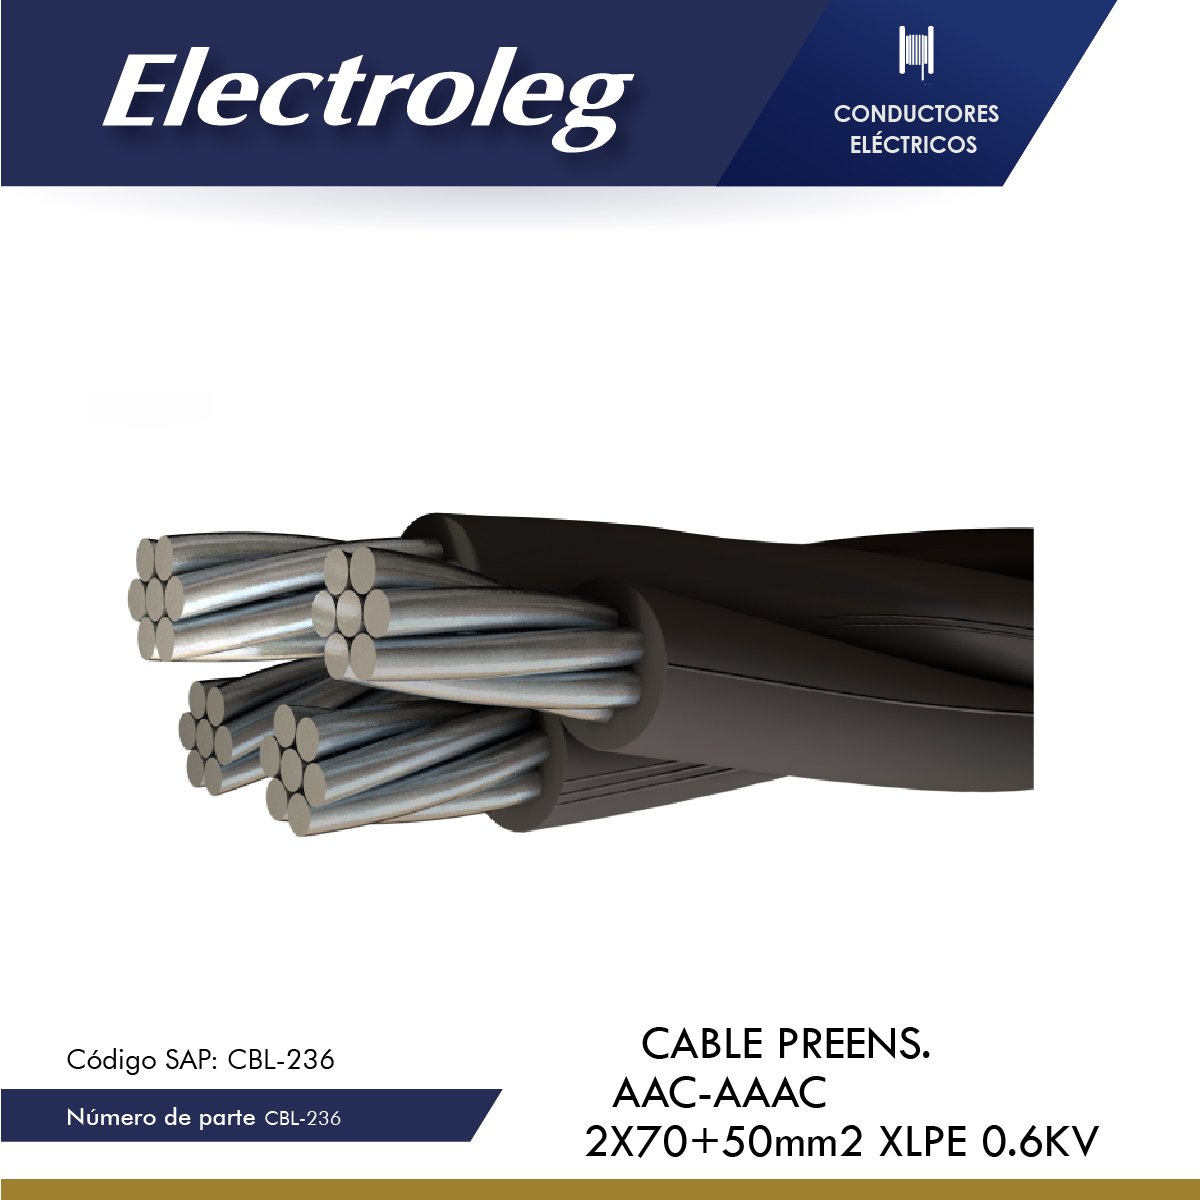 CABLE PREENS. AAC-AAAC 2X70+50mm2 XLPE 0.6KV